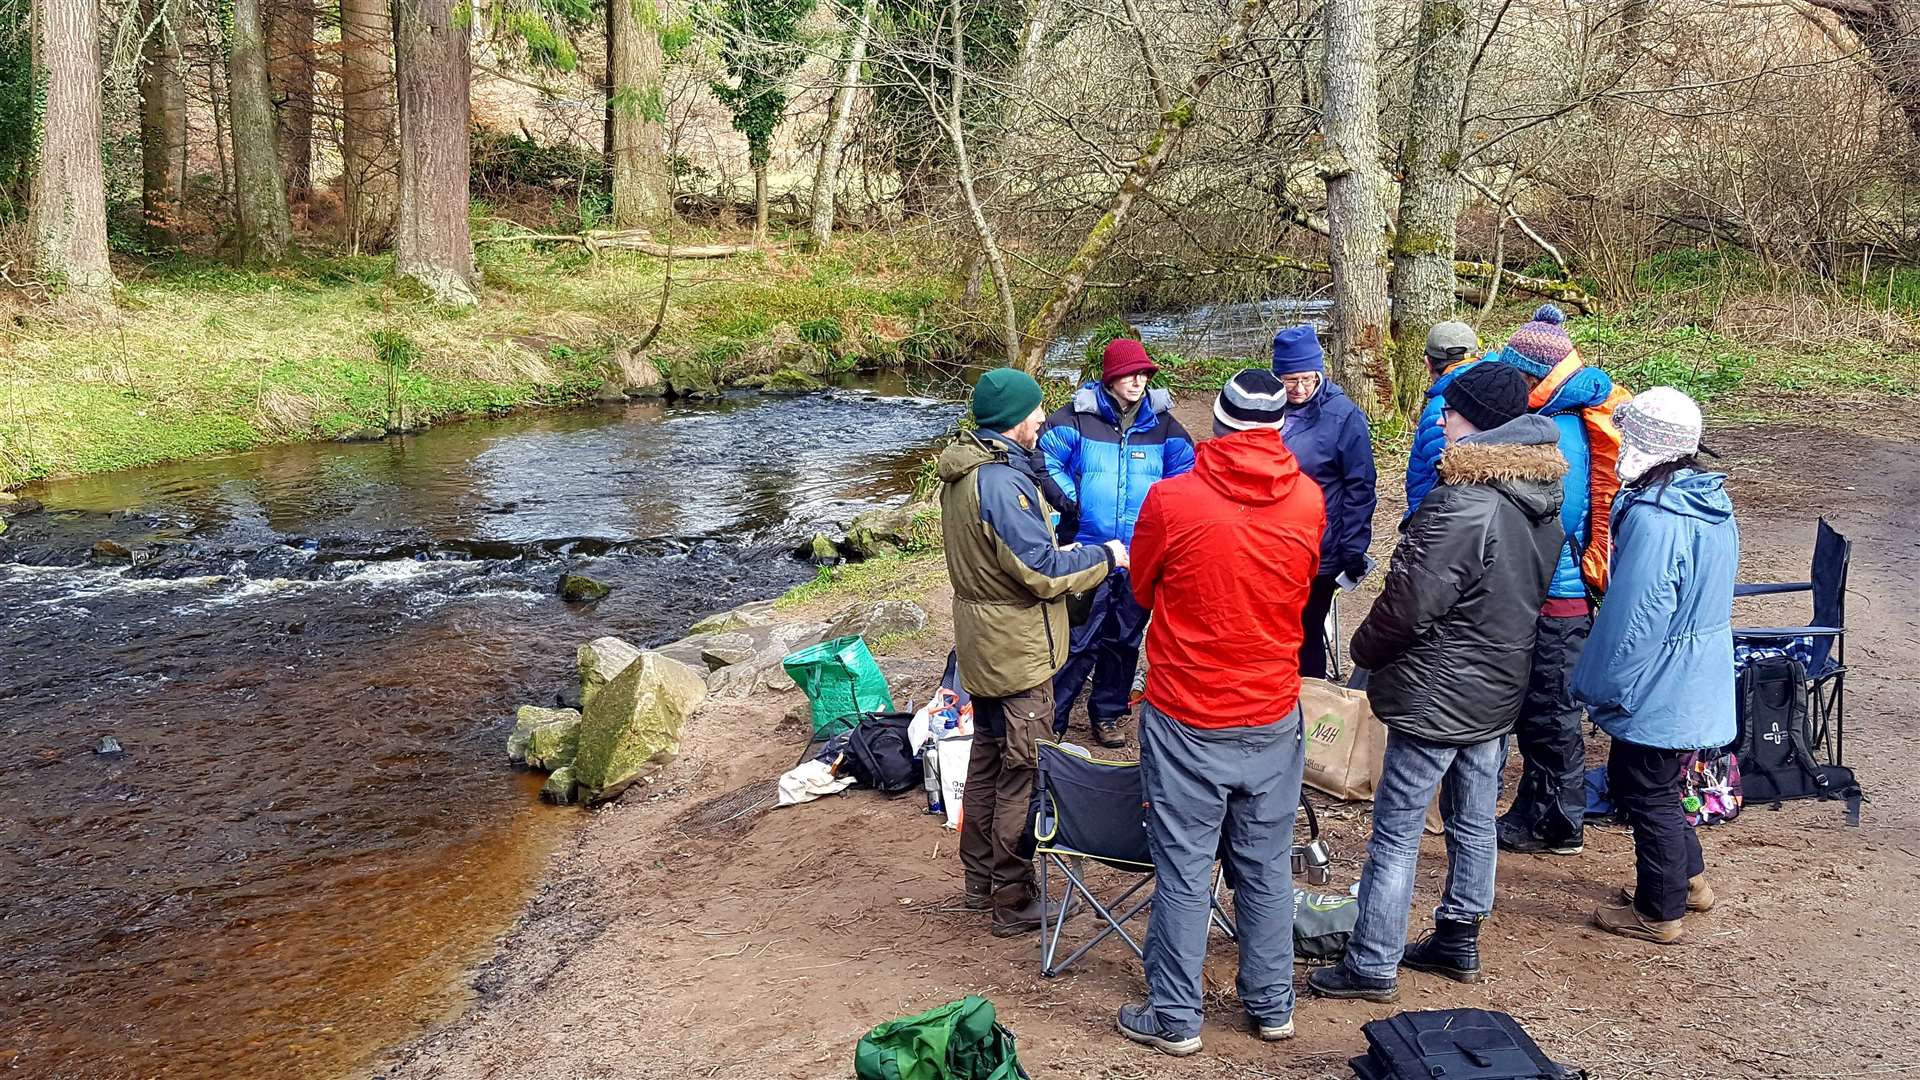 A Branching Out group being introduced to the day's activities near Sanquhar pond.